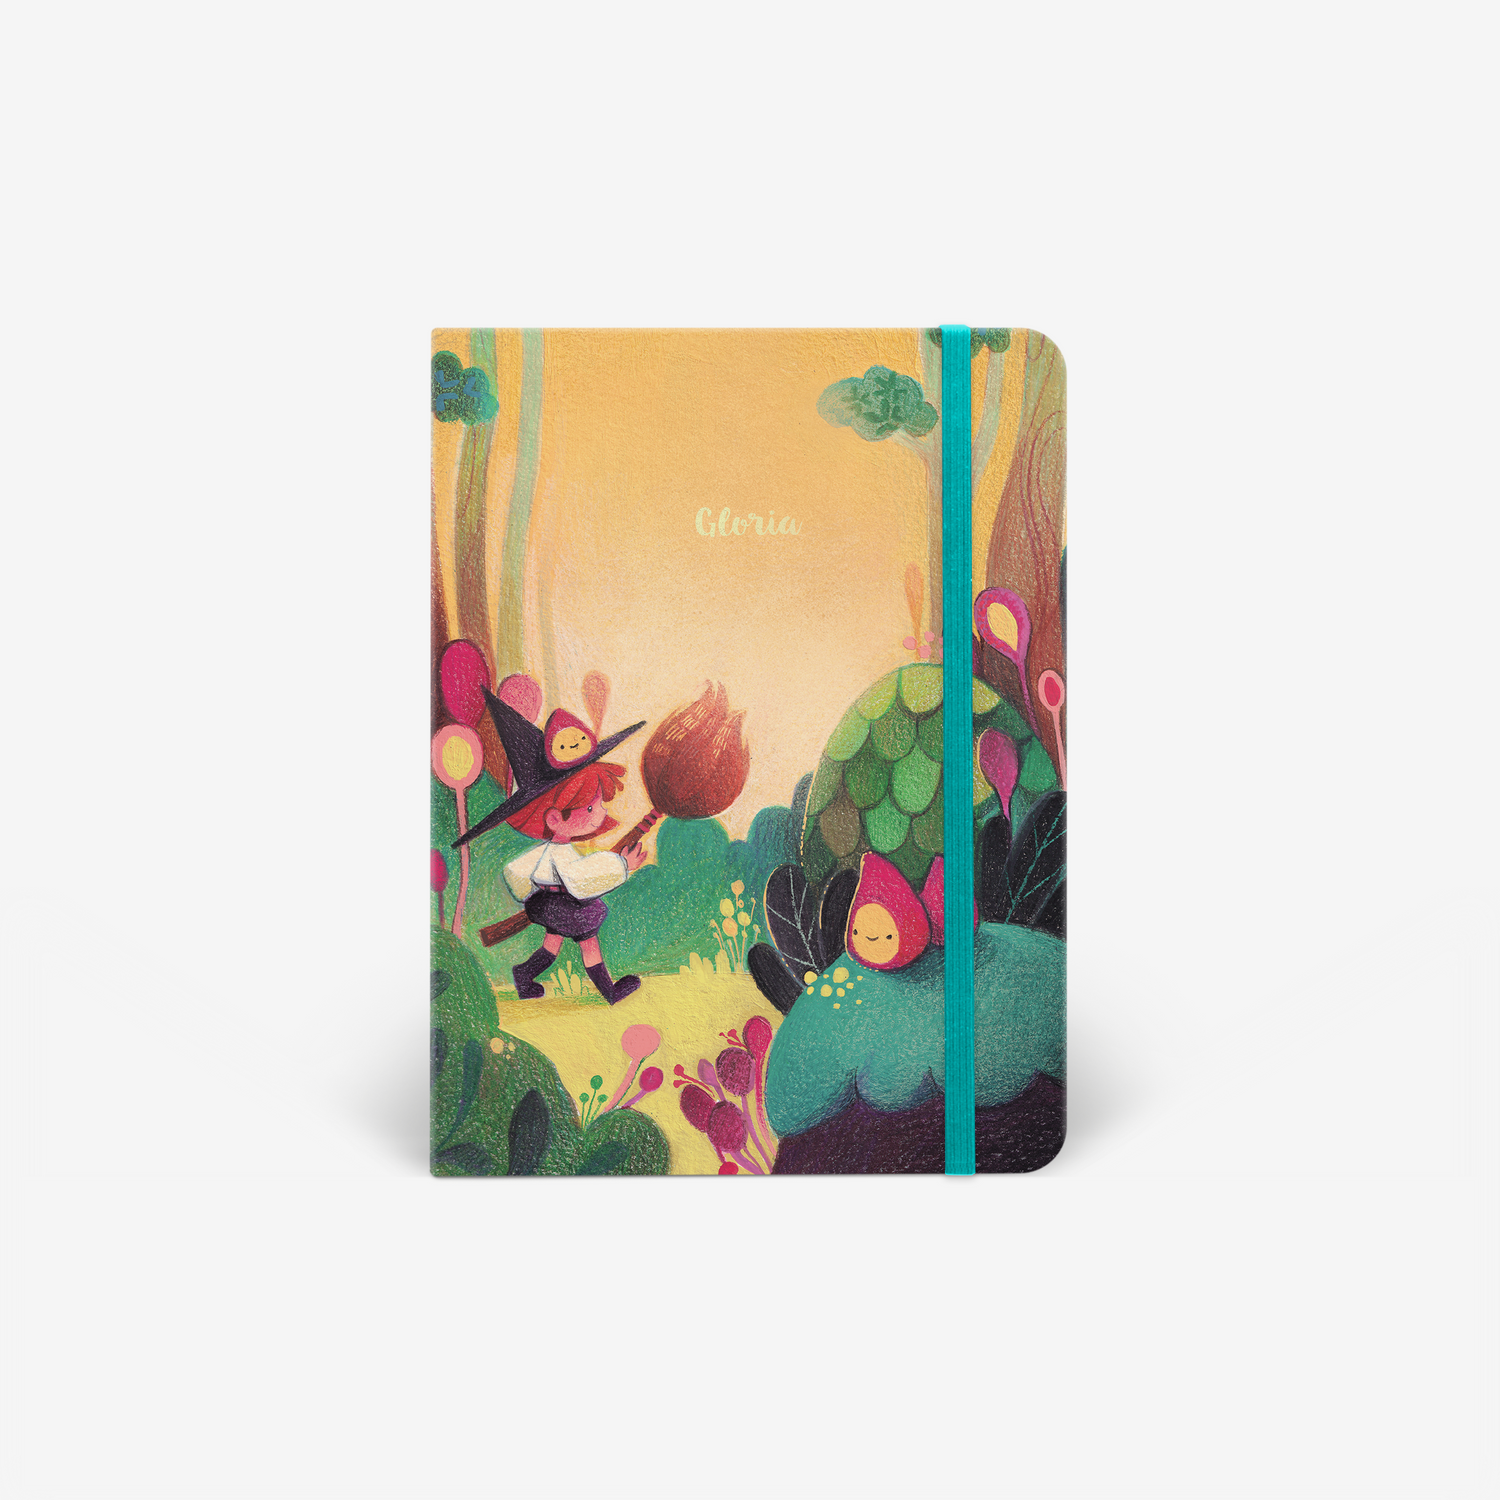 Forest Fable Light Cover